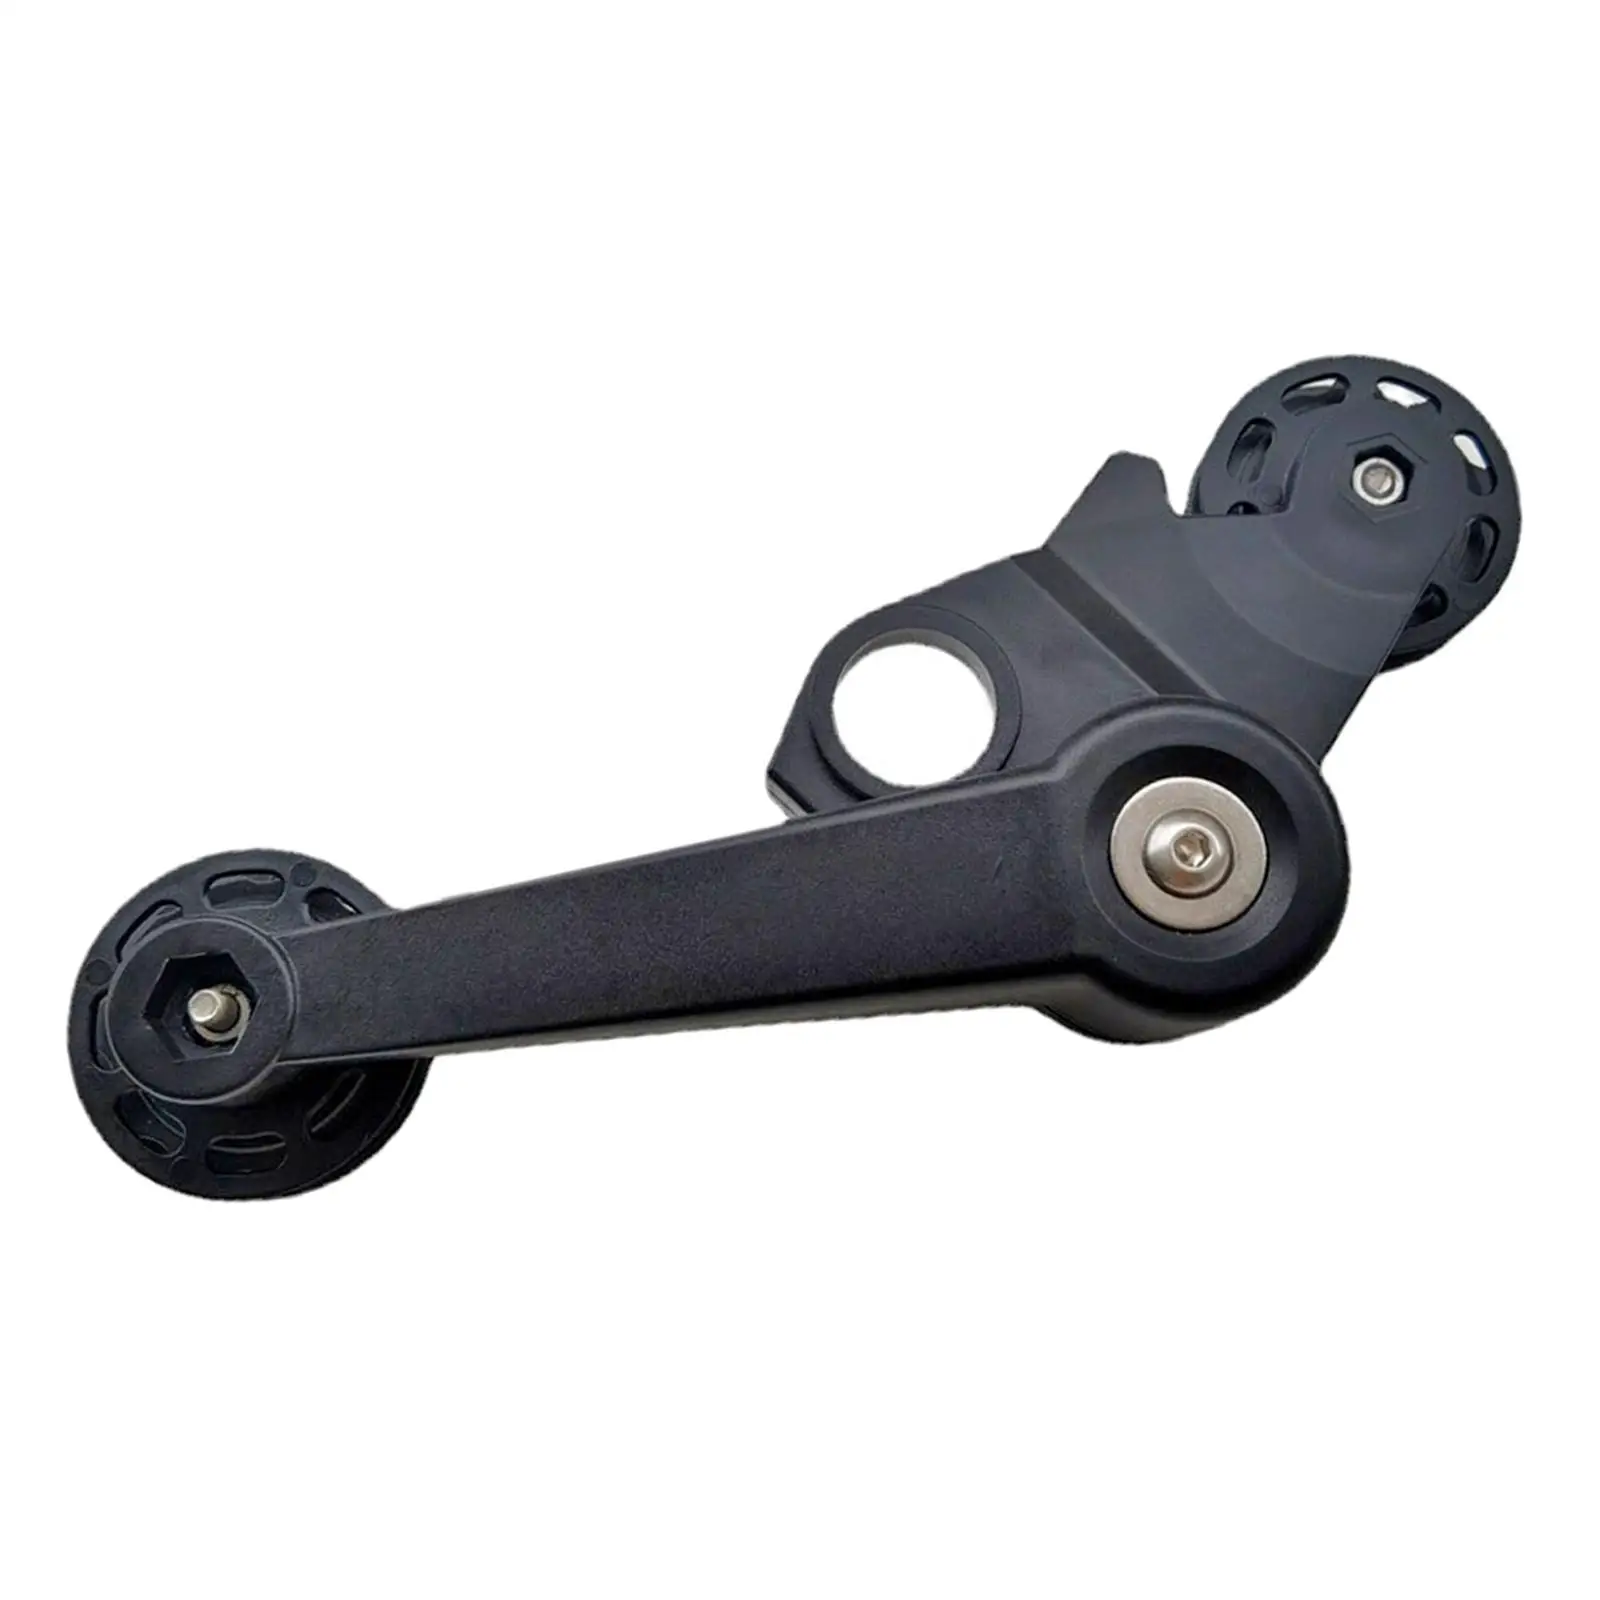 Bike Chain Tensioner CNC Rear Derailleur Single Speed Bicycle Chain Stabilizer for Cycling Replacement Parts